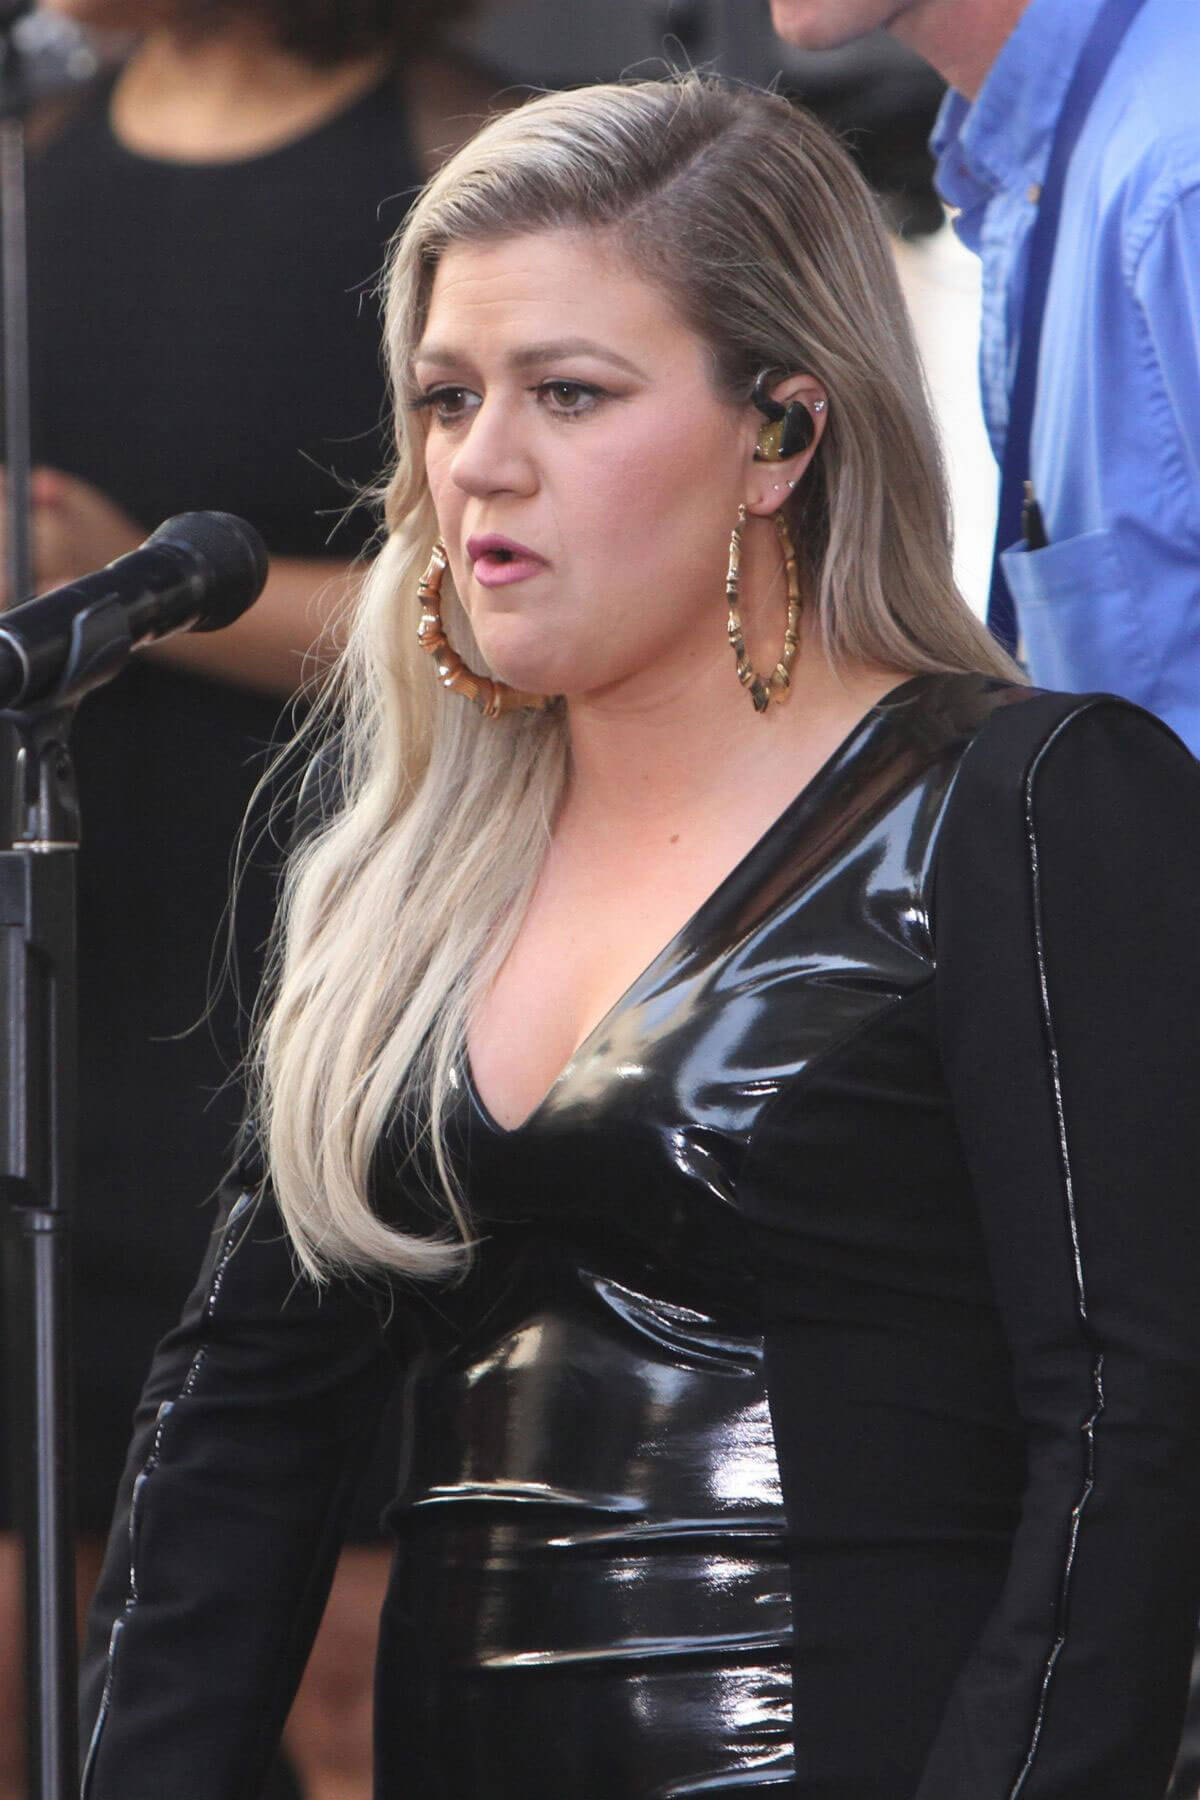 Kelly Clarkson Performs at Today Show Concert Series in New York 2018/06/08